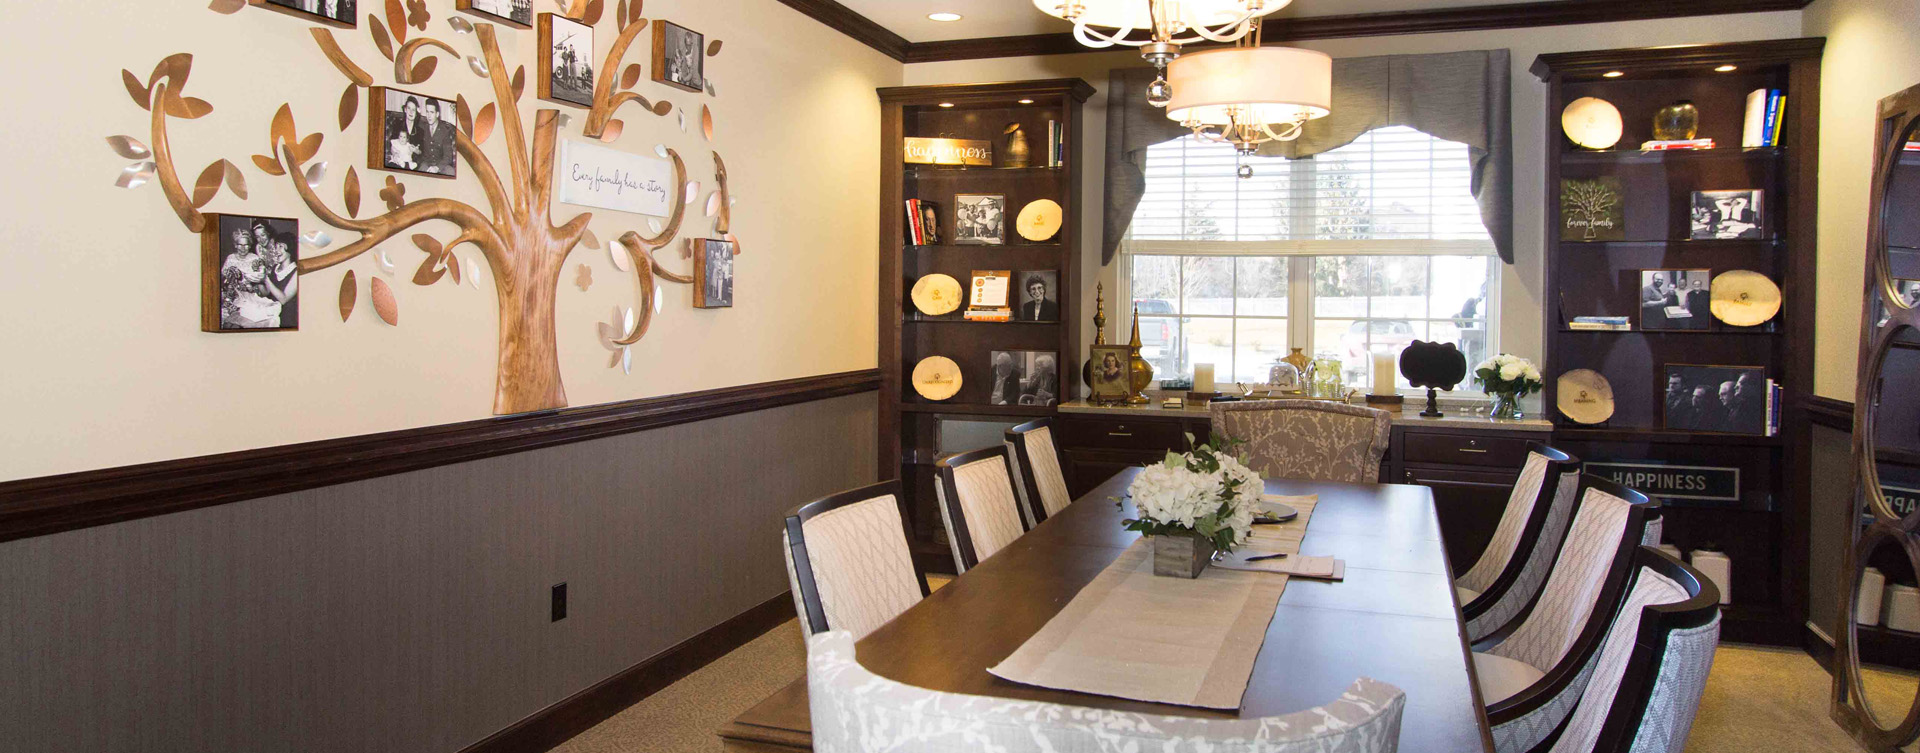 Food is best when shared with family and friends in the private dining room at Bickford of Gurnee